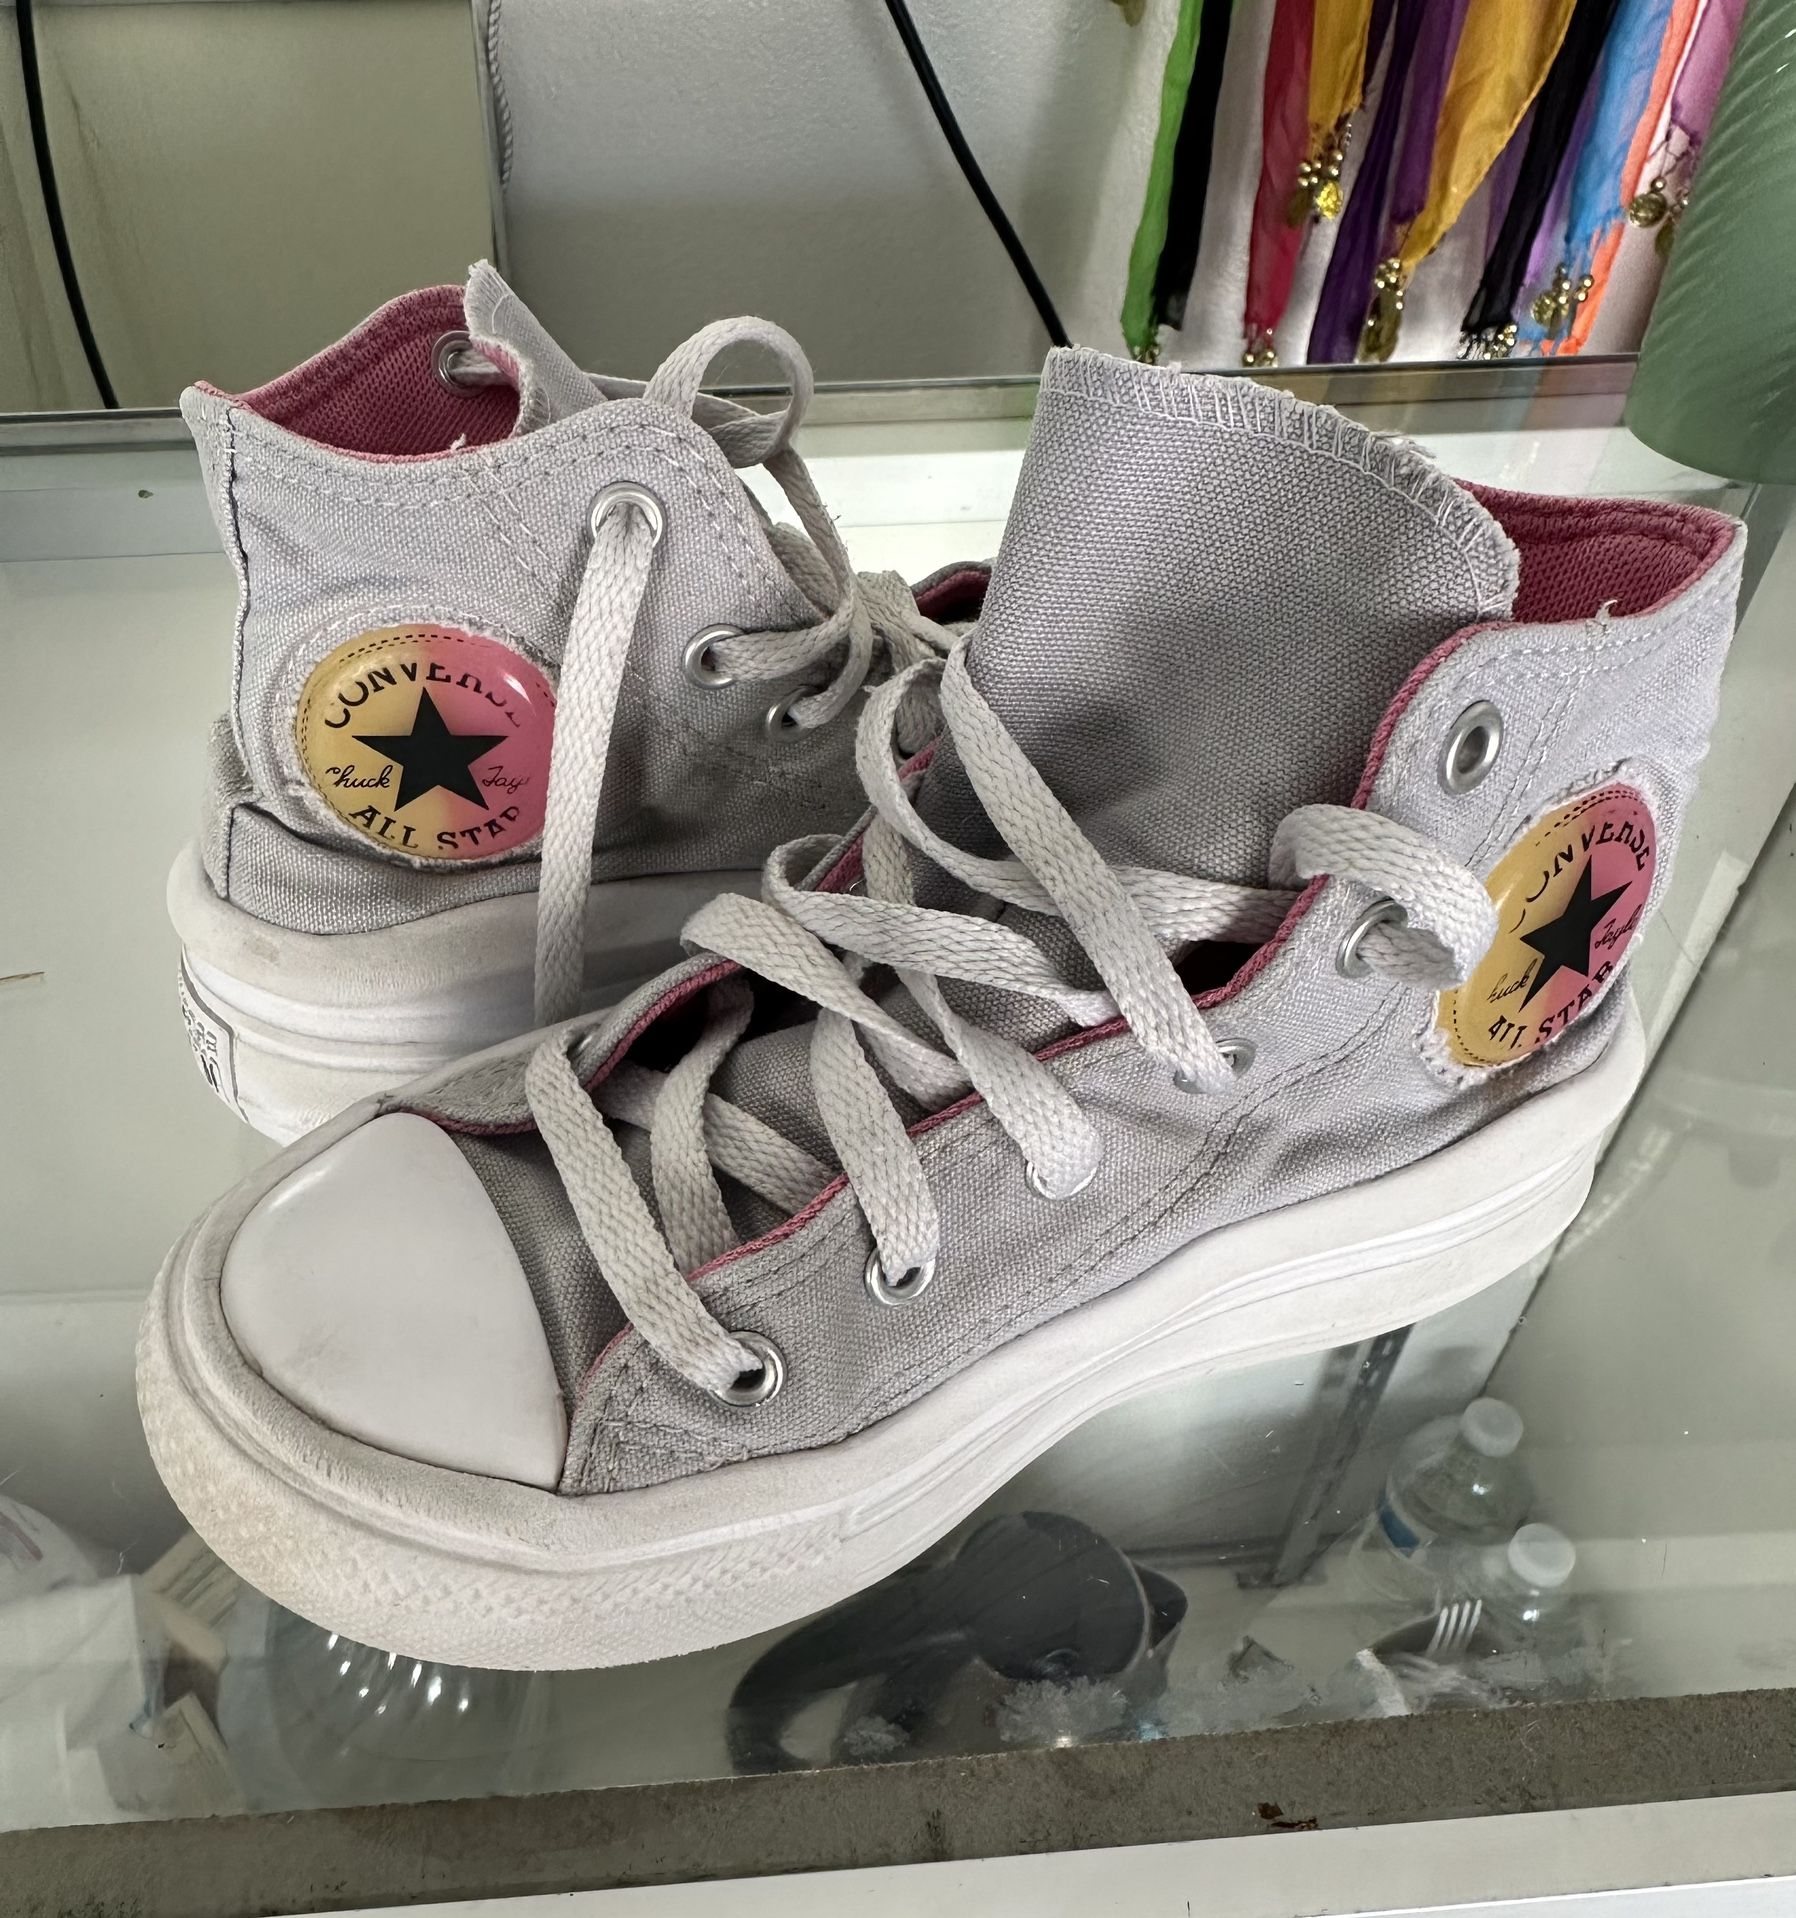 Converse All Star Ls Size for Sale Moreno Valley, CA - OfferUp